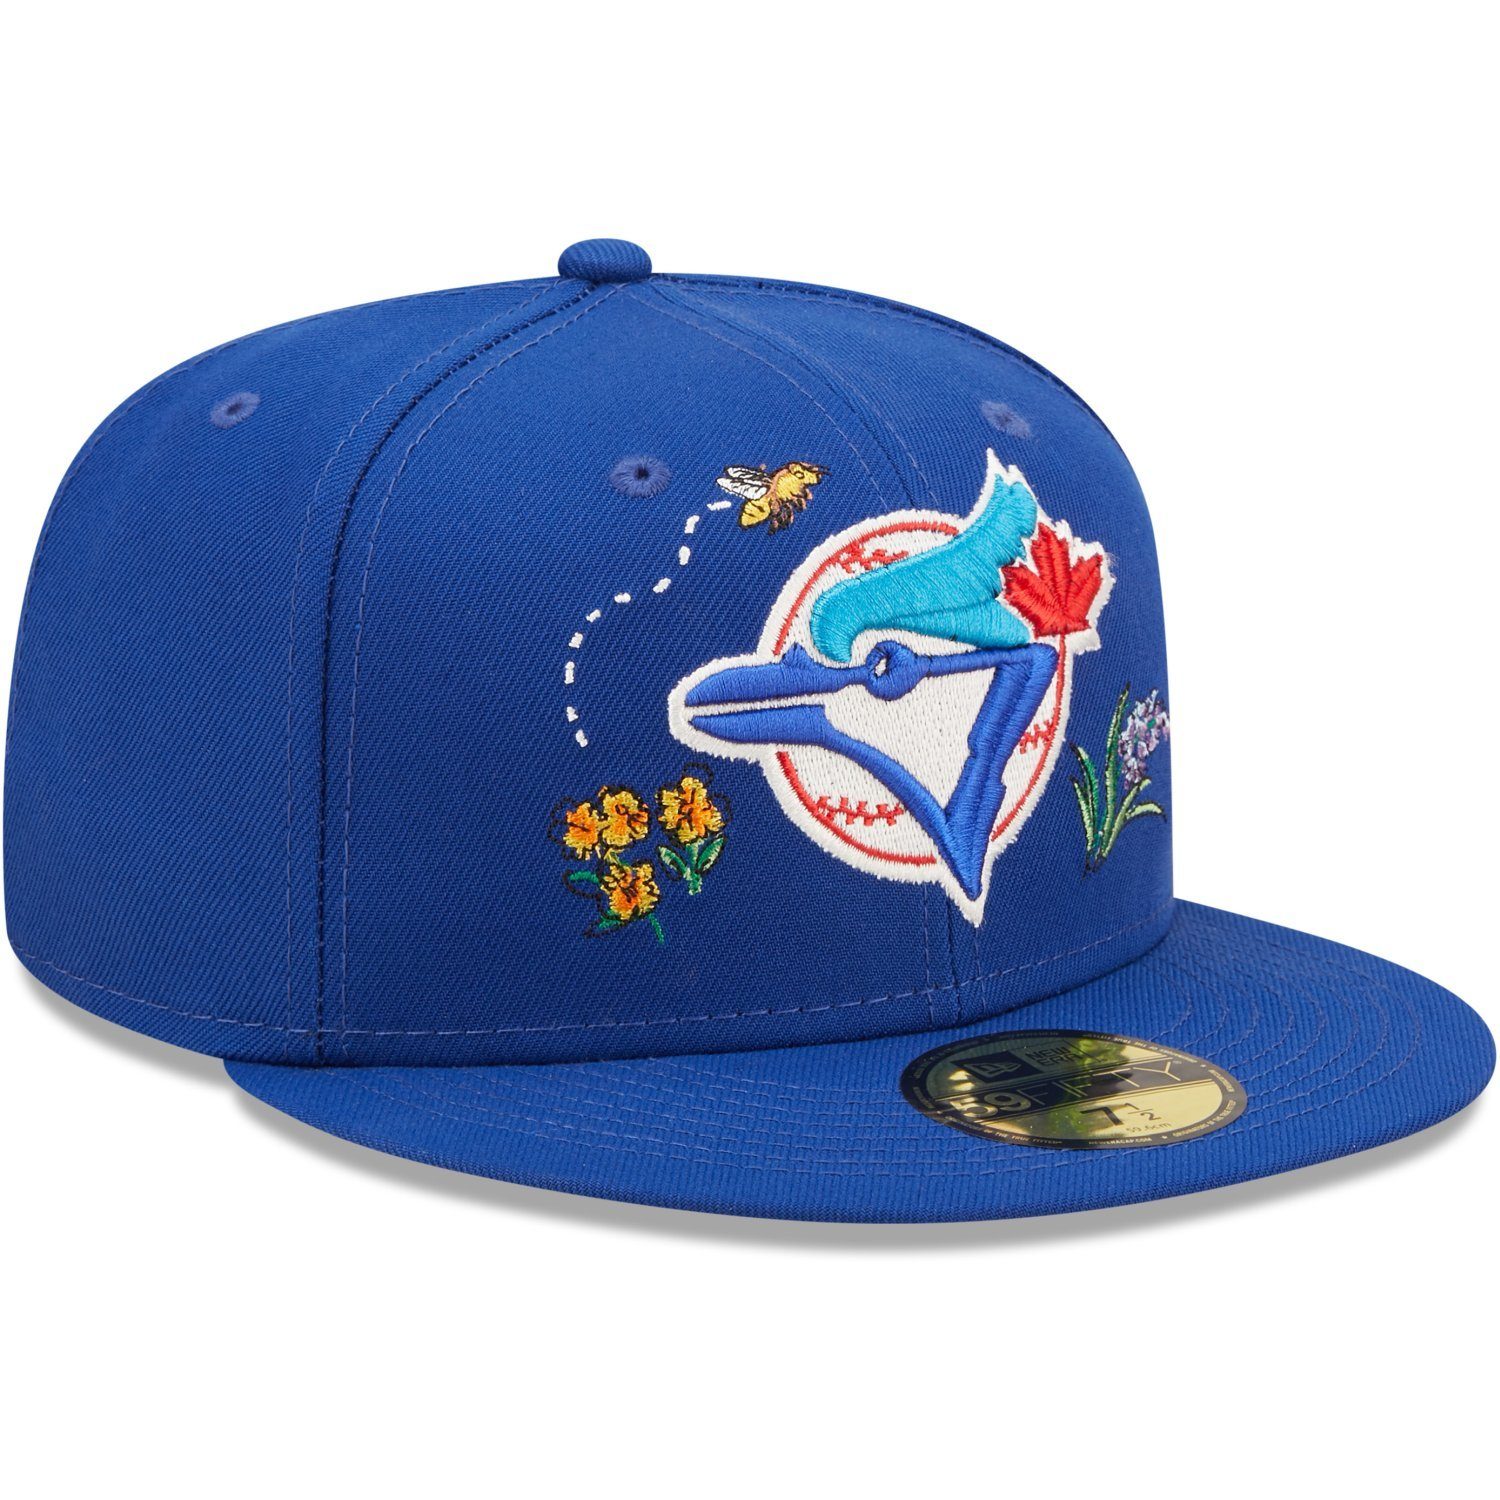 New Era Jays WATER Cap Fitted Toronto FLORAL blau 59Fifty